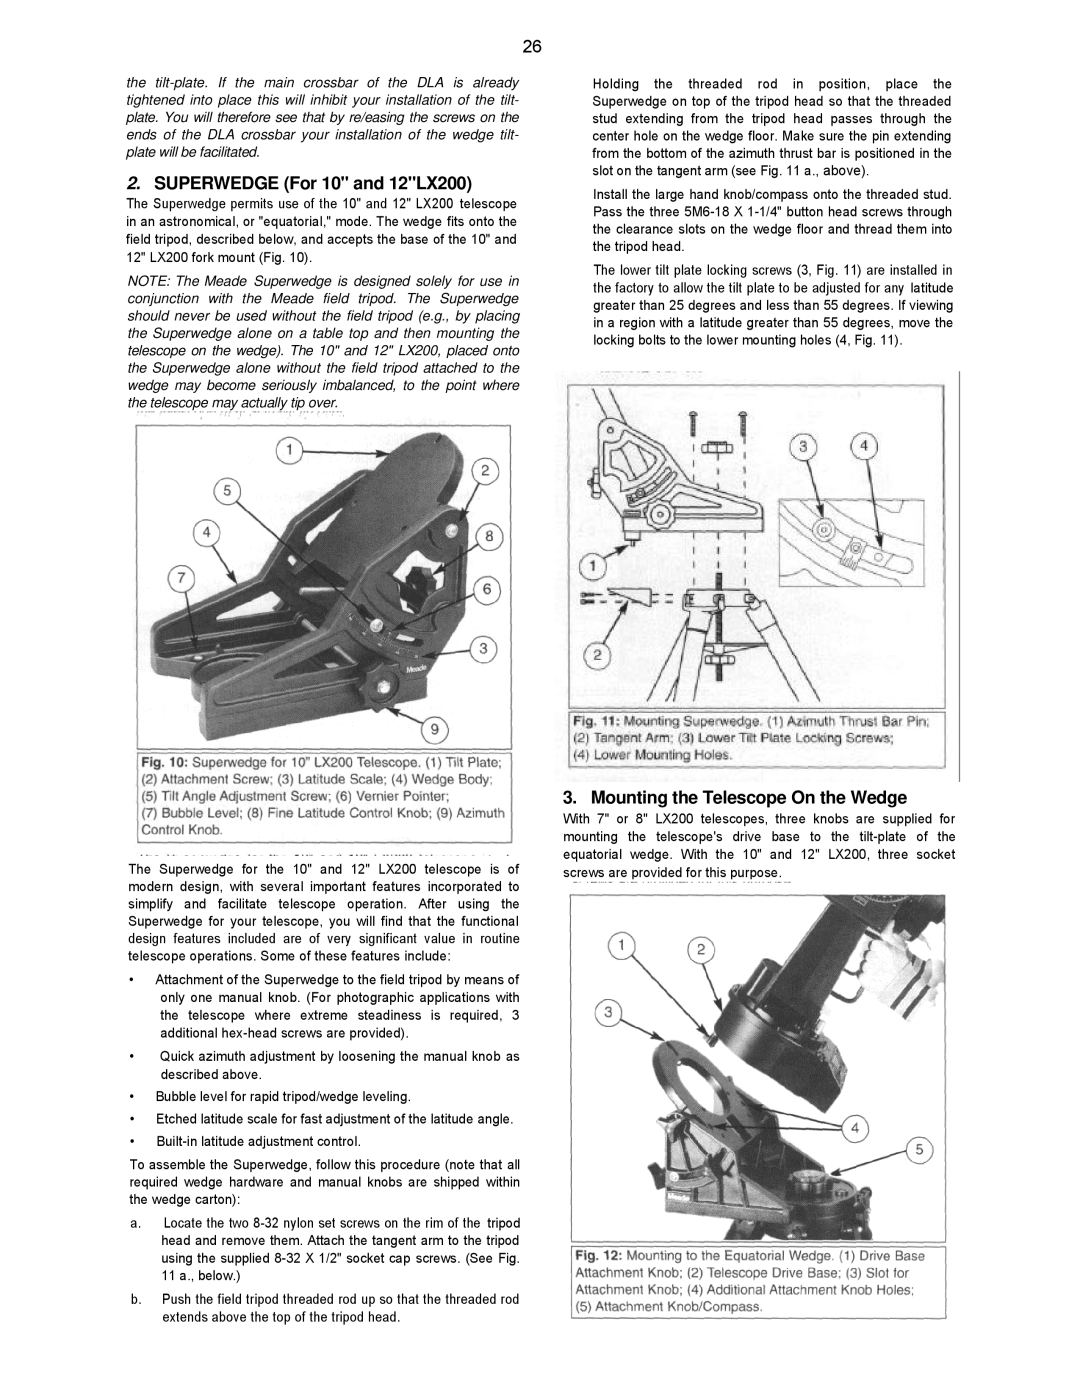 Leisure Time instruction manual SUPERWEDGE For 10 and 12LX200, Mounting the Telescope On the Wedge 